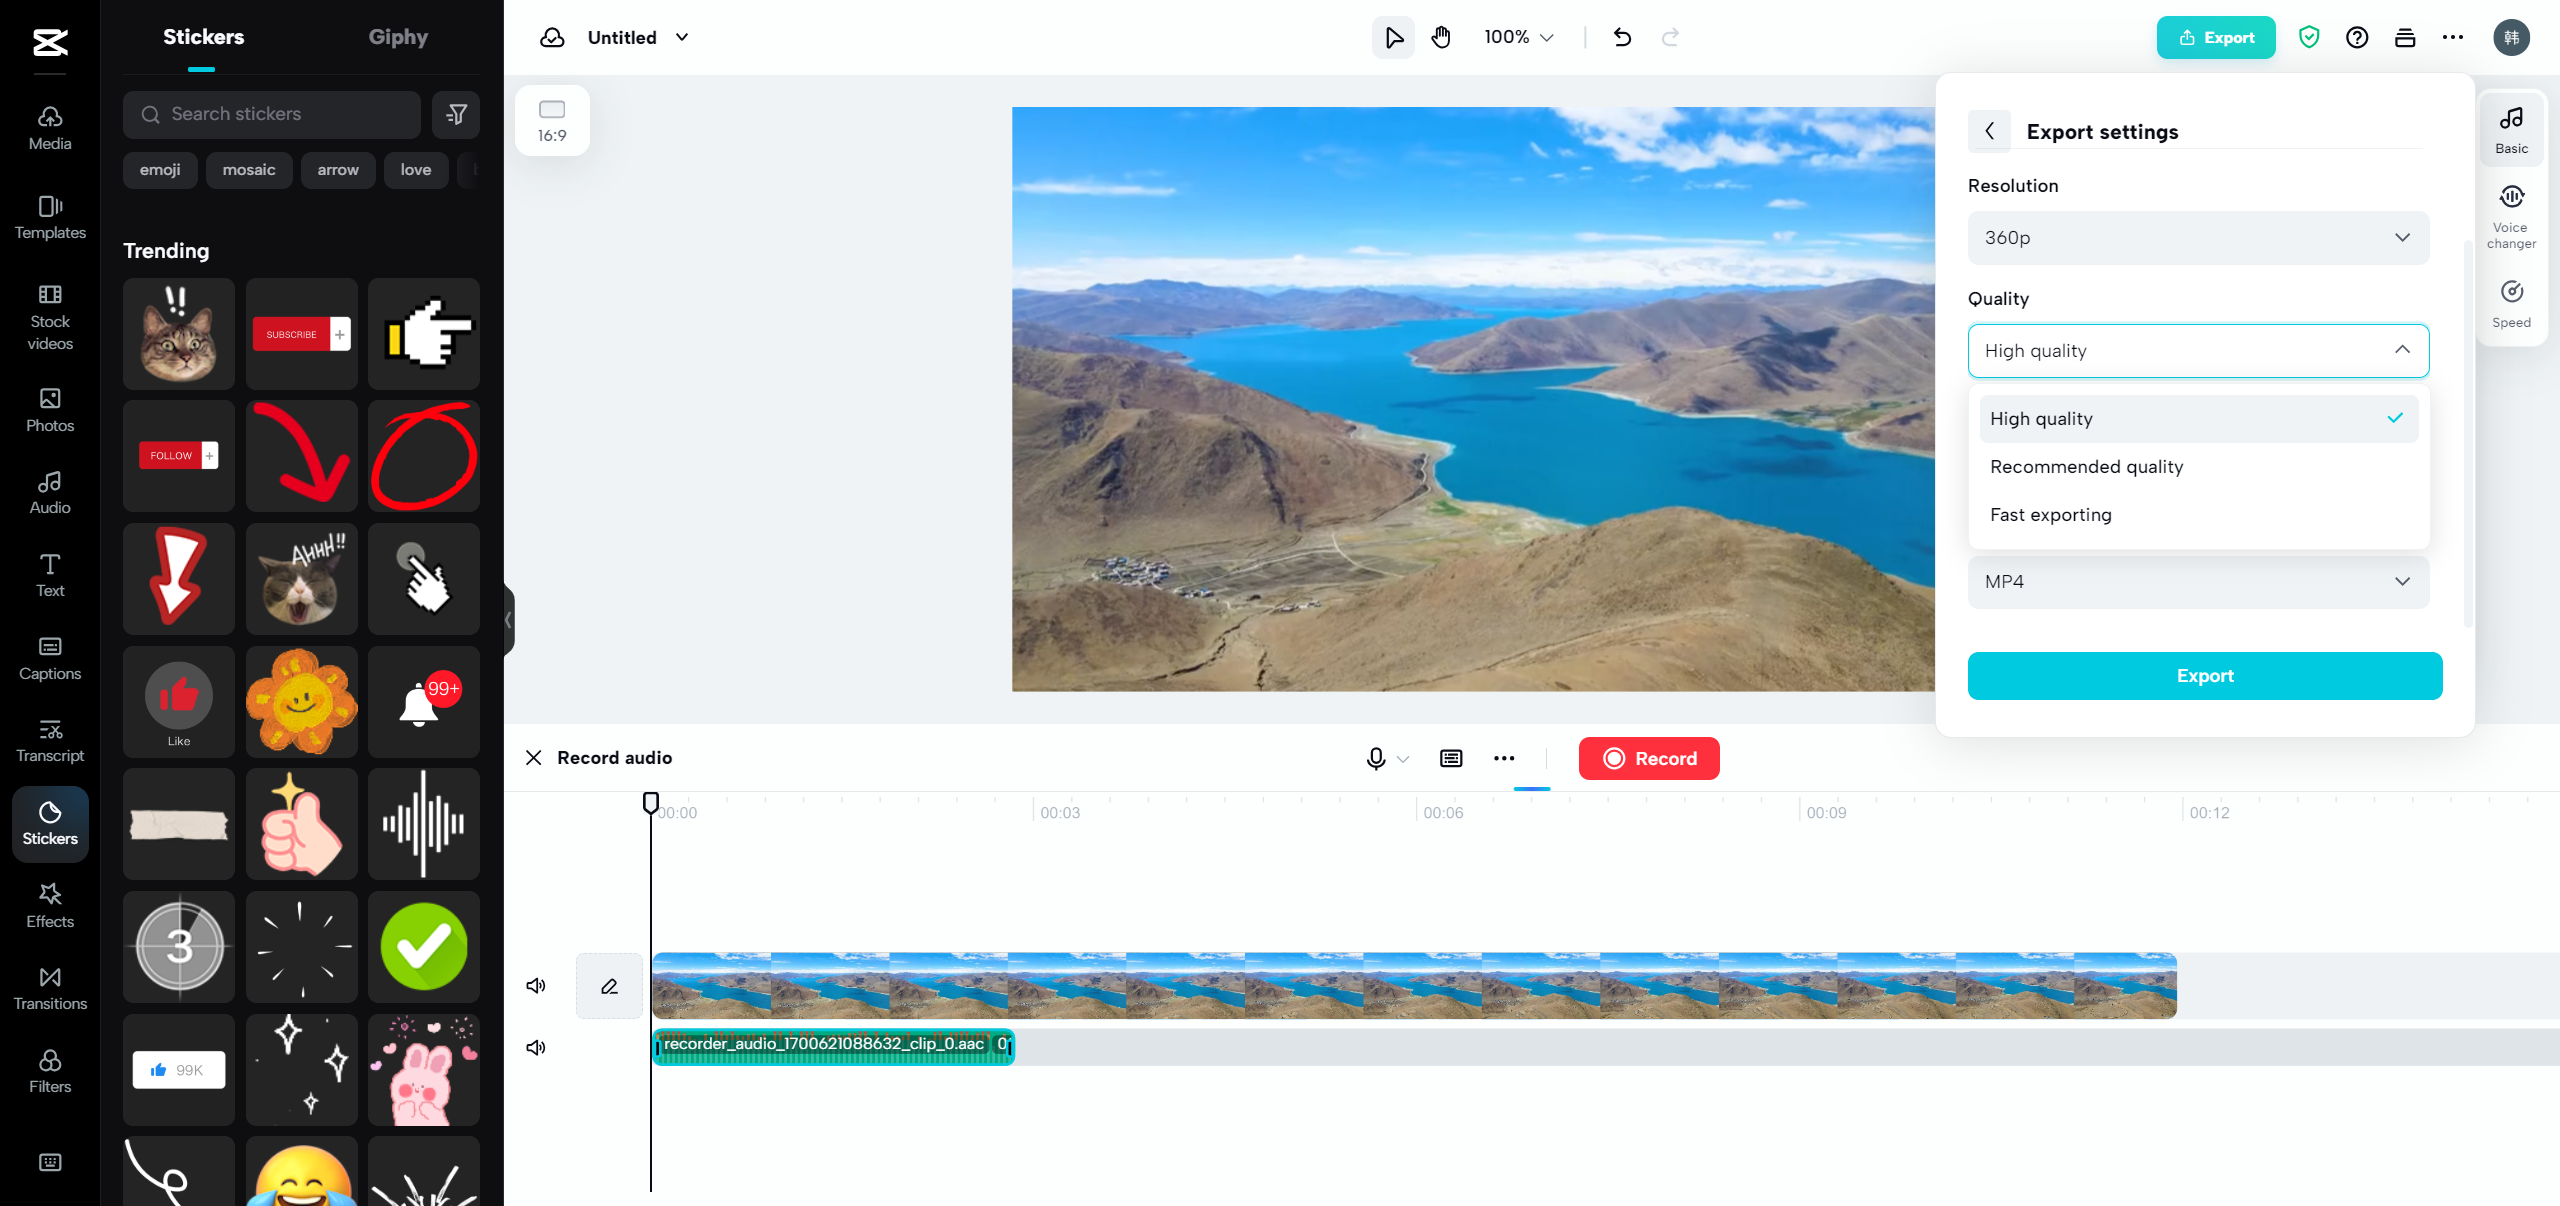 CapCut emerges as a compelling alternative to VLC when it comes to video compression, offering a user-friendly interface and efficient compression capabilities.